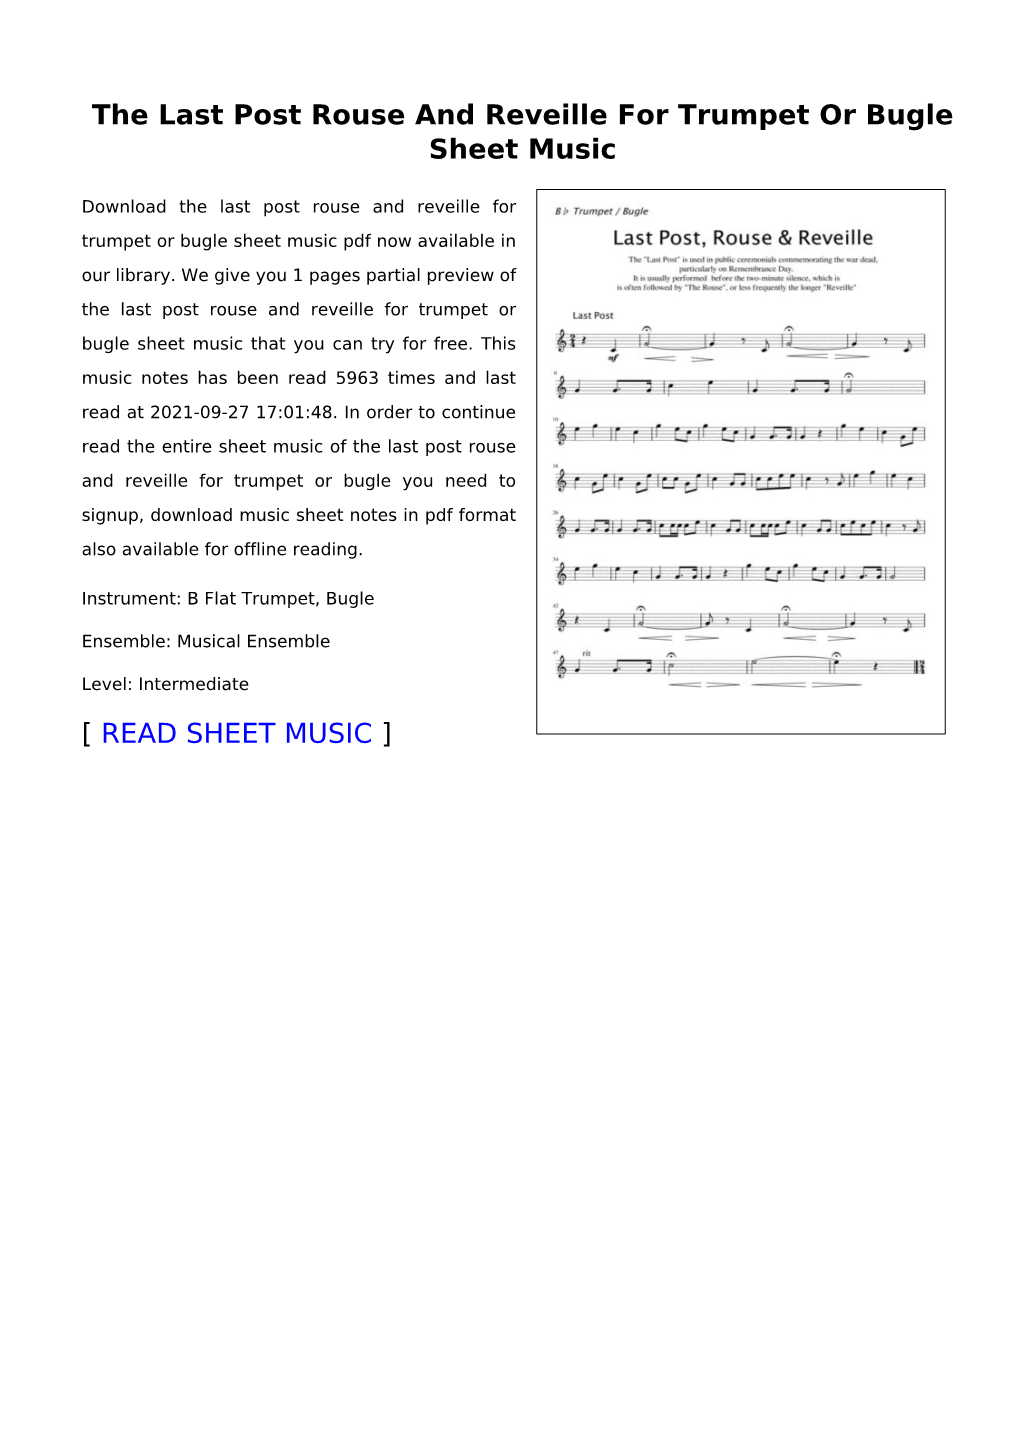 The Last Post Rouse and Reveille for Trumpet Or Bugle Sheet Music